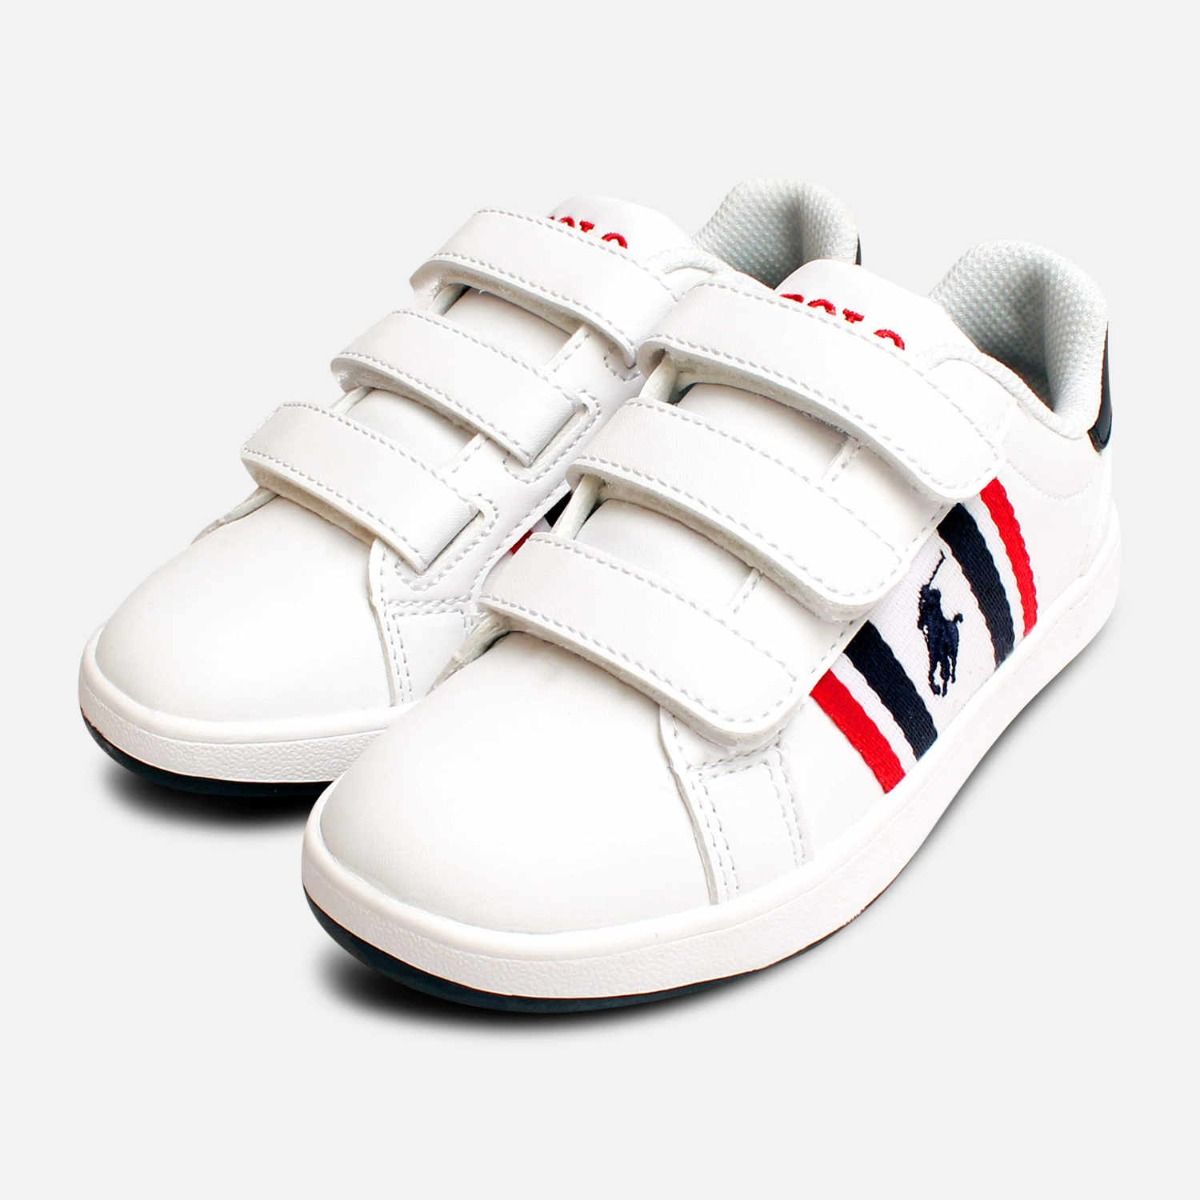 Ralph Lauren Polo Childrens Classic White Leather Shoes